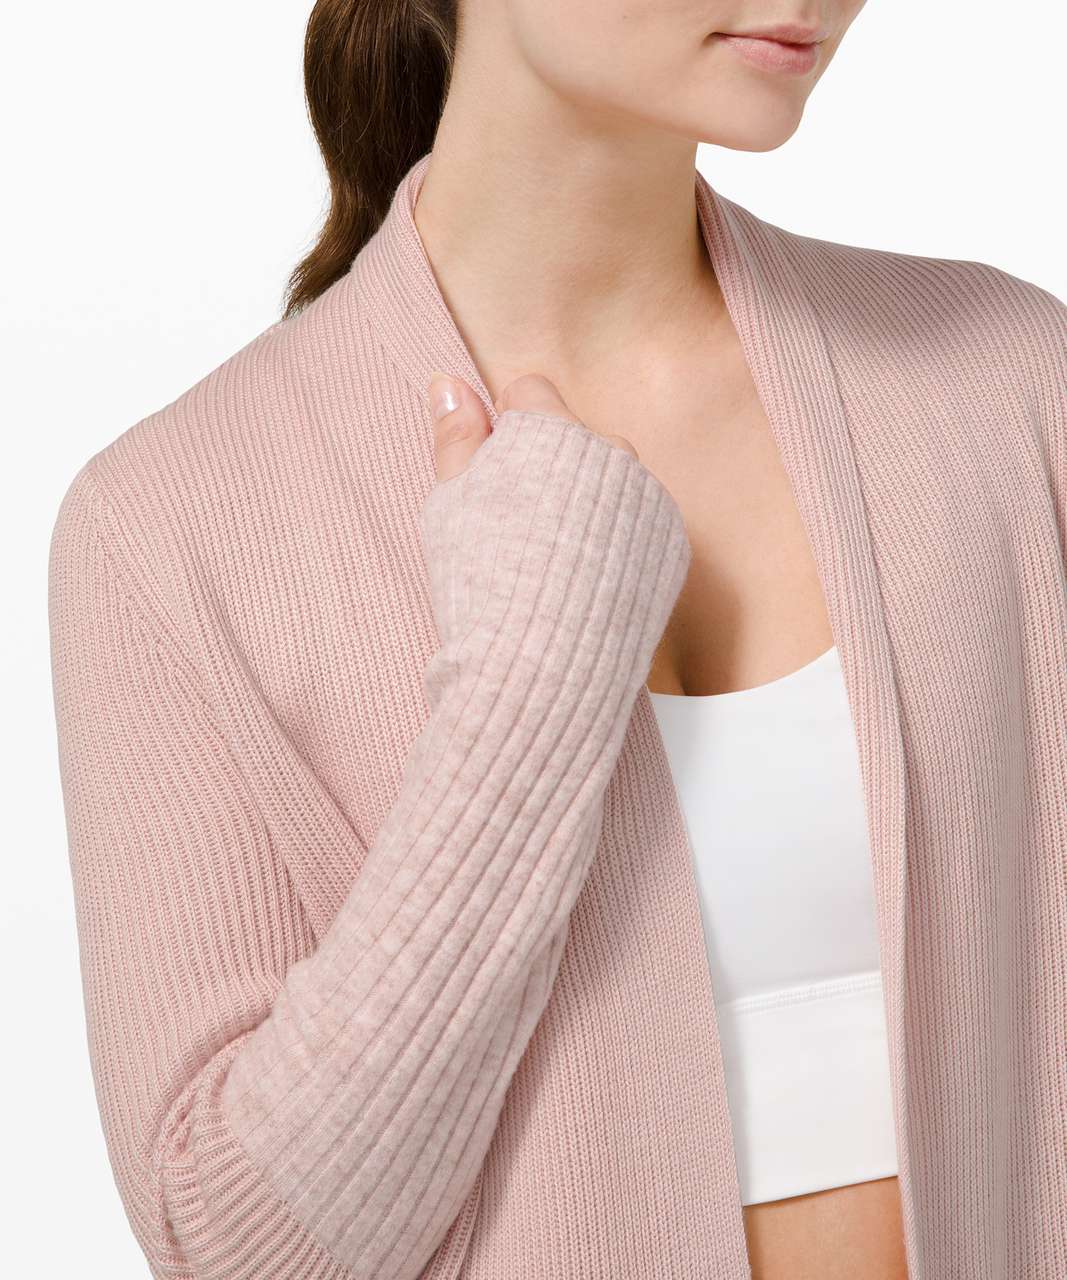 Lululemon Restful Intention Sweater Wrap - Pink Bliss / Heathered Pink Bliss